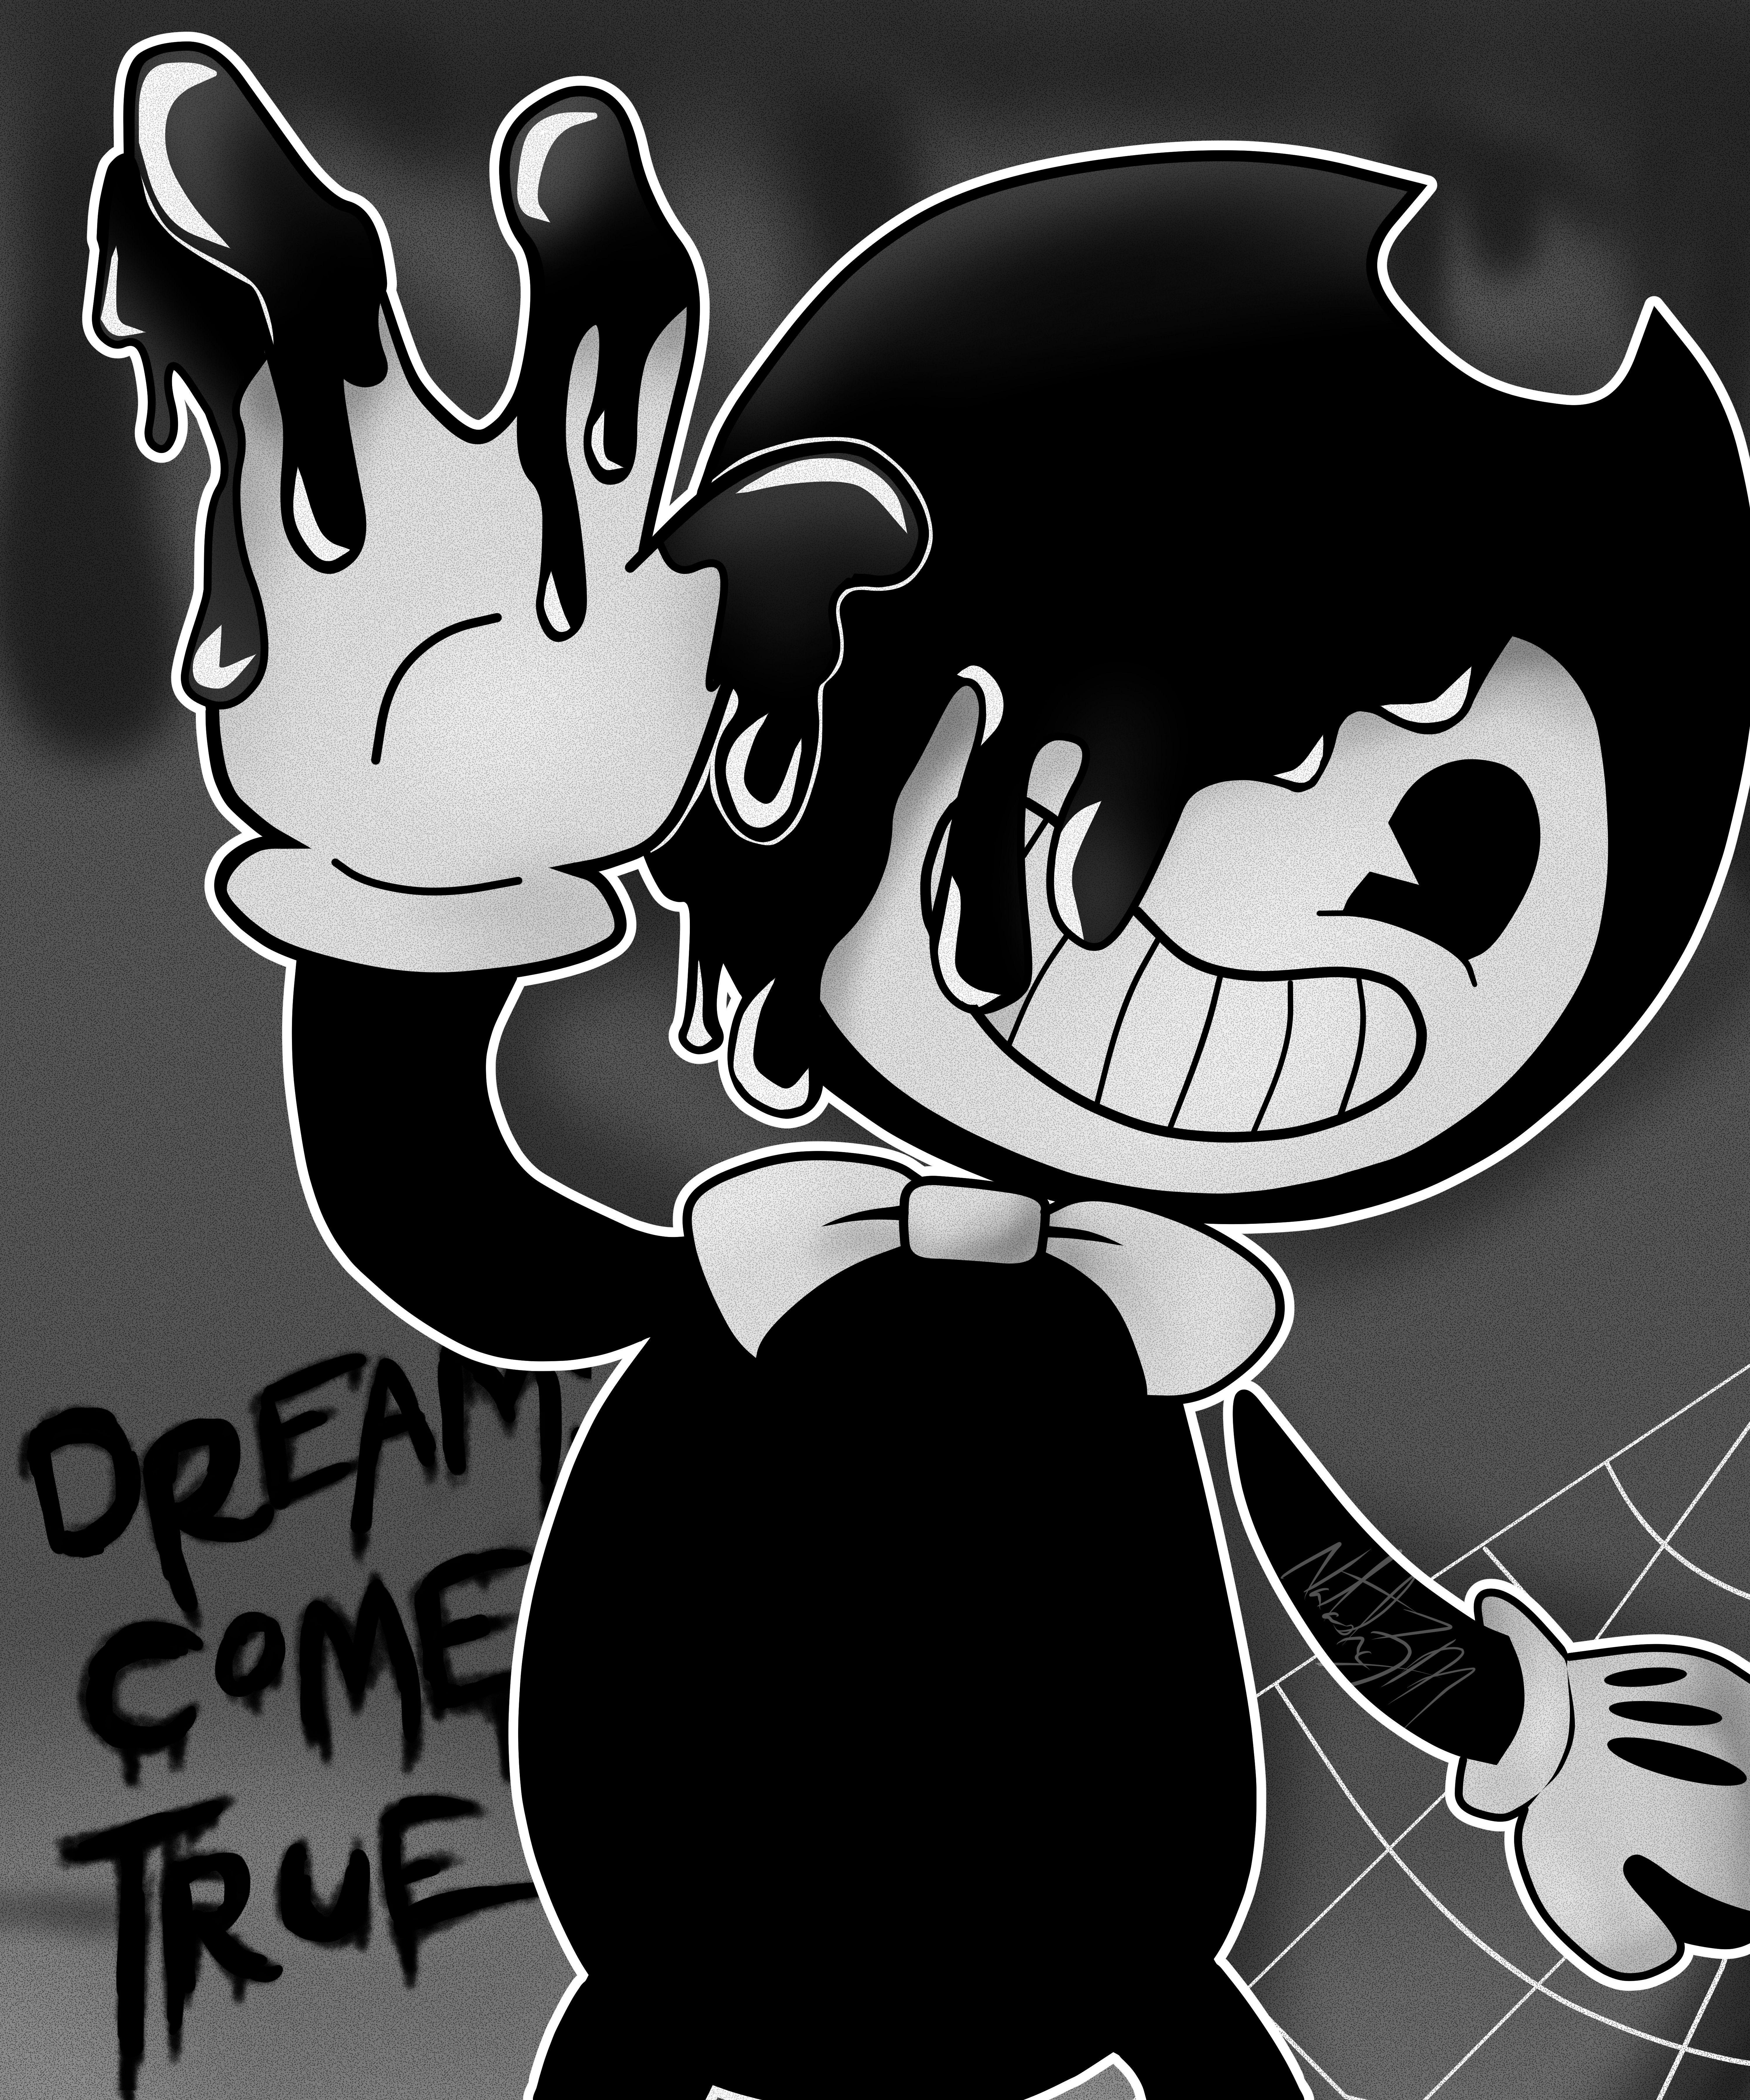 Bendy And The Ink Machine Wallpaper